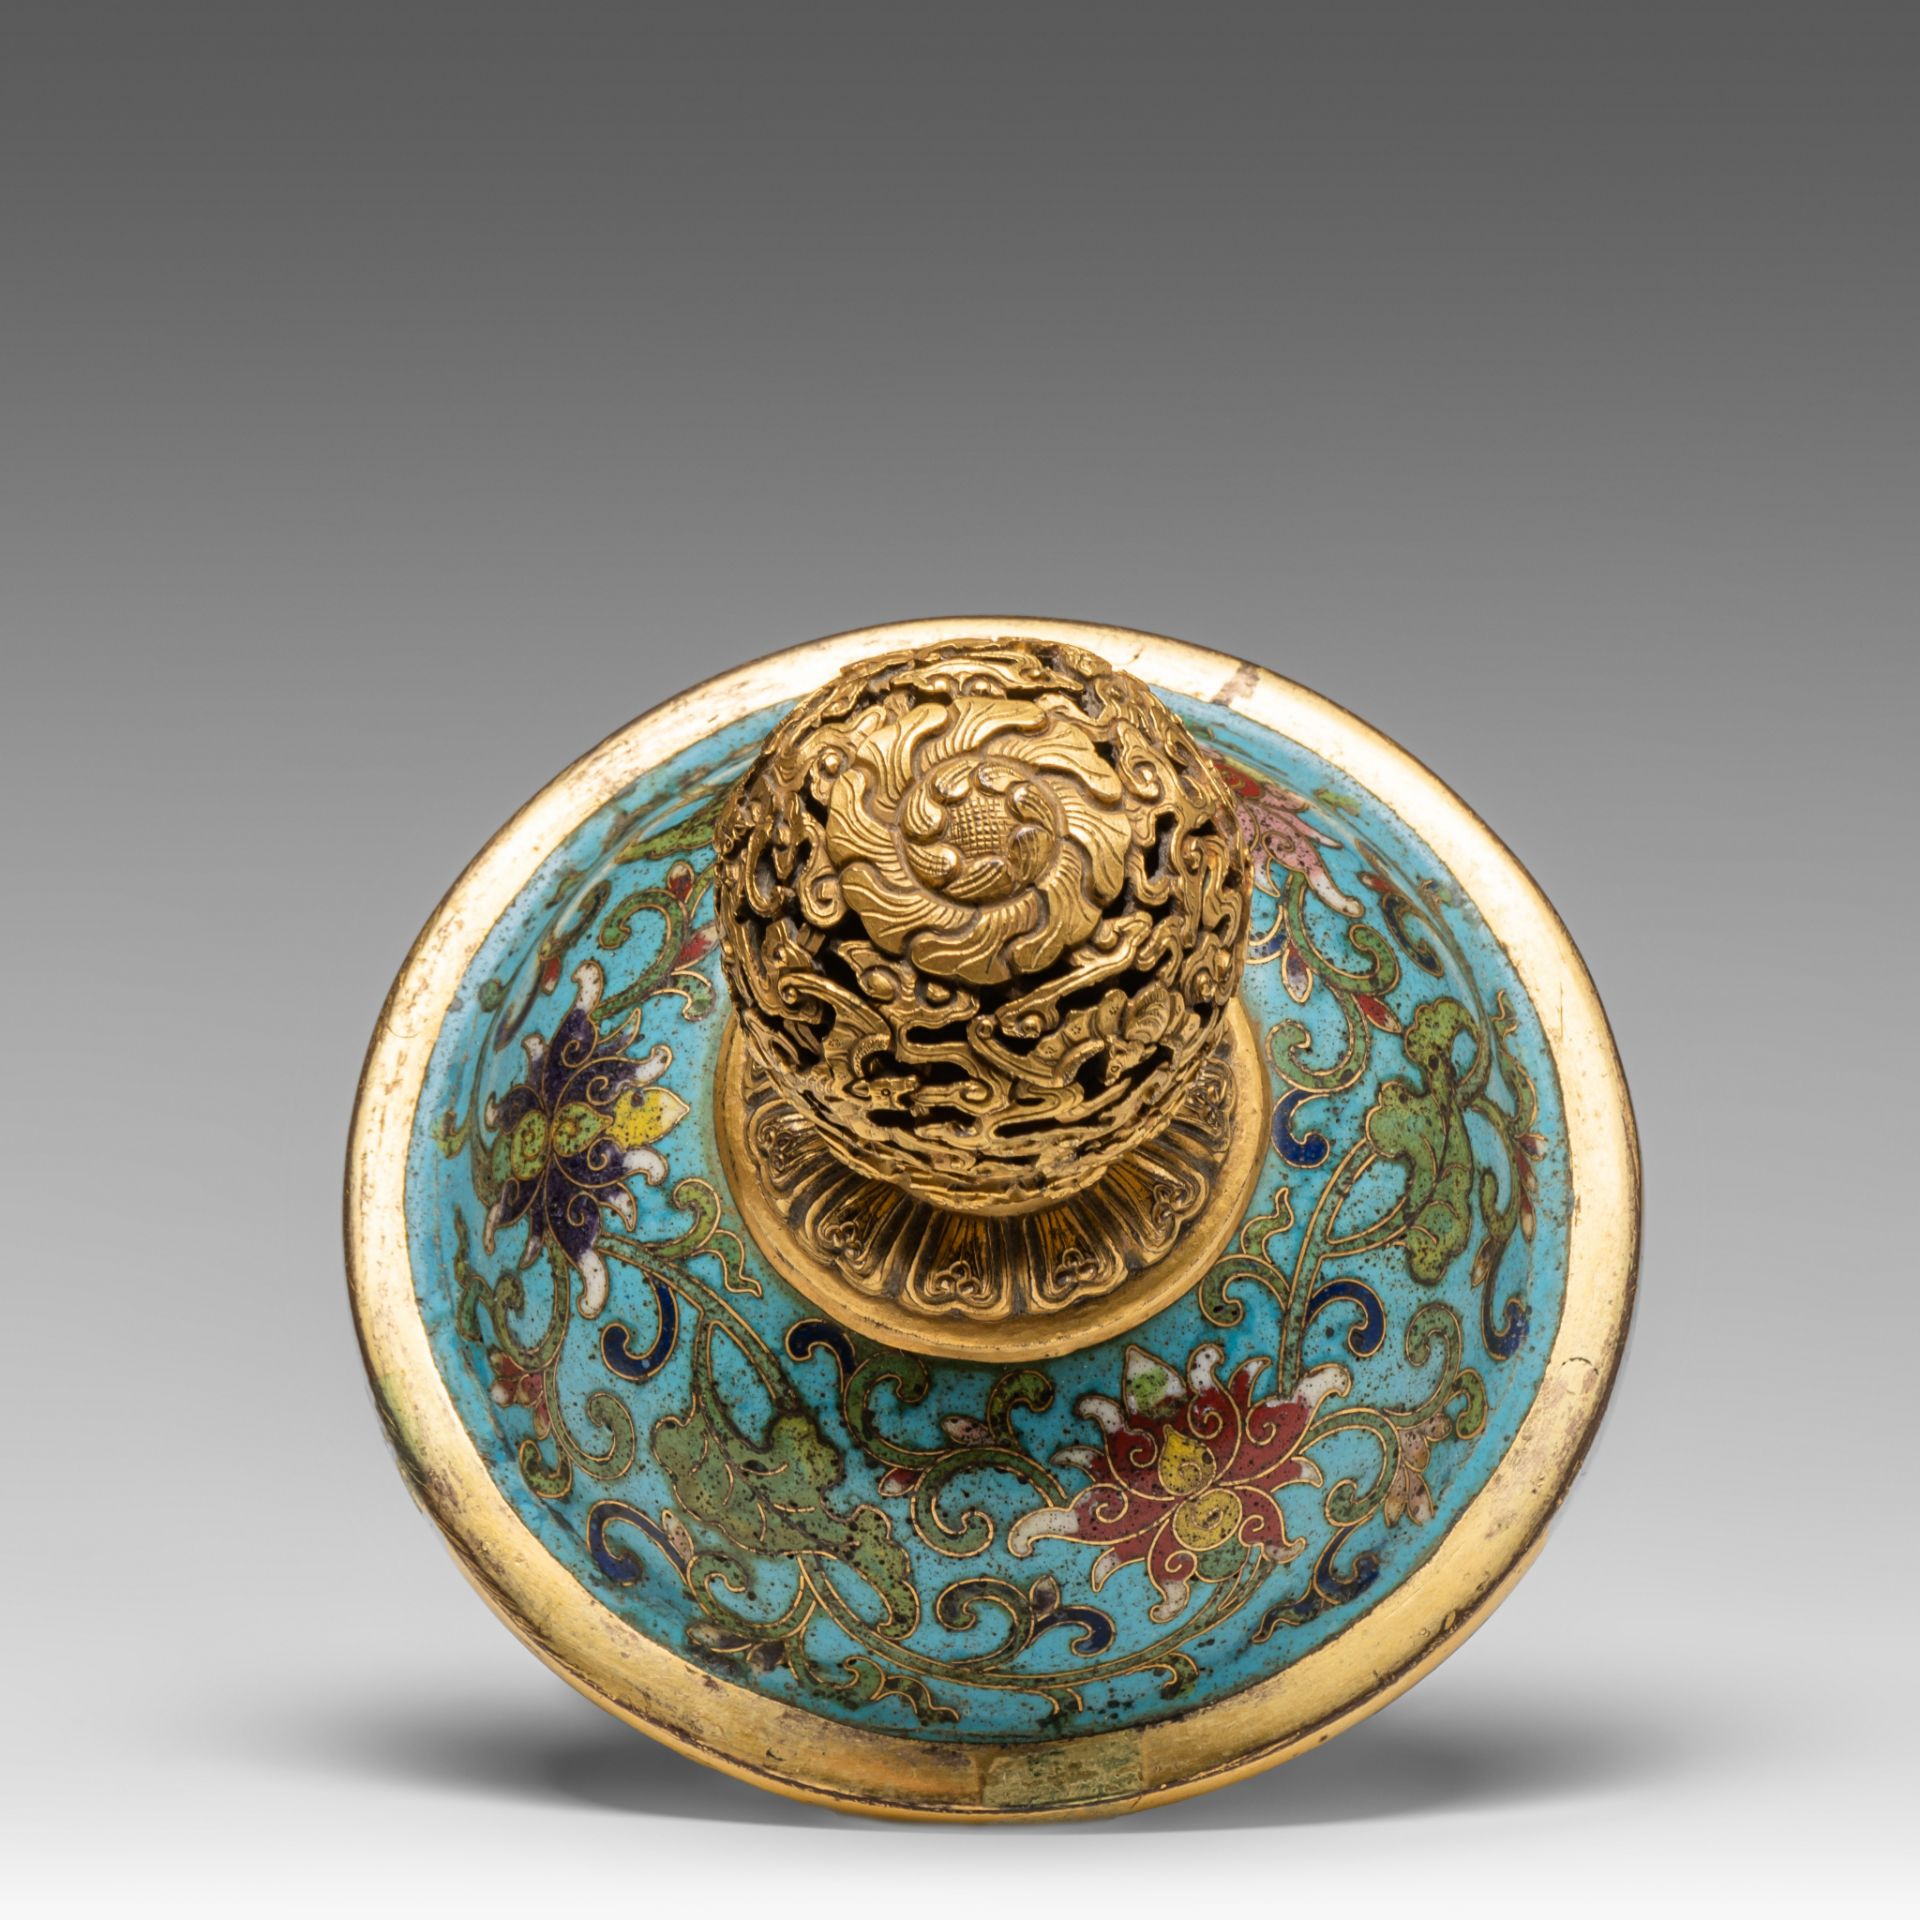 A fine Chinese cloisonne enamelled tripod censer and cover, late 18thC, H 32,8 cm - Image 7 of 8